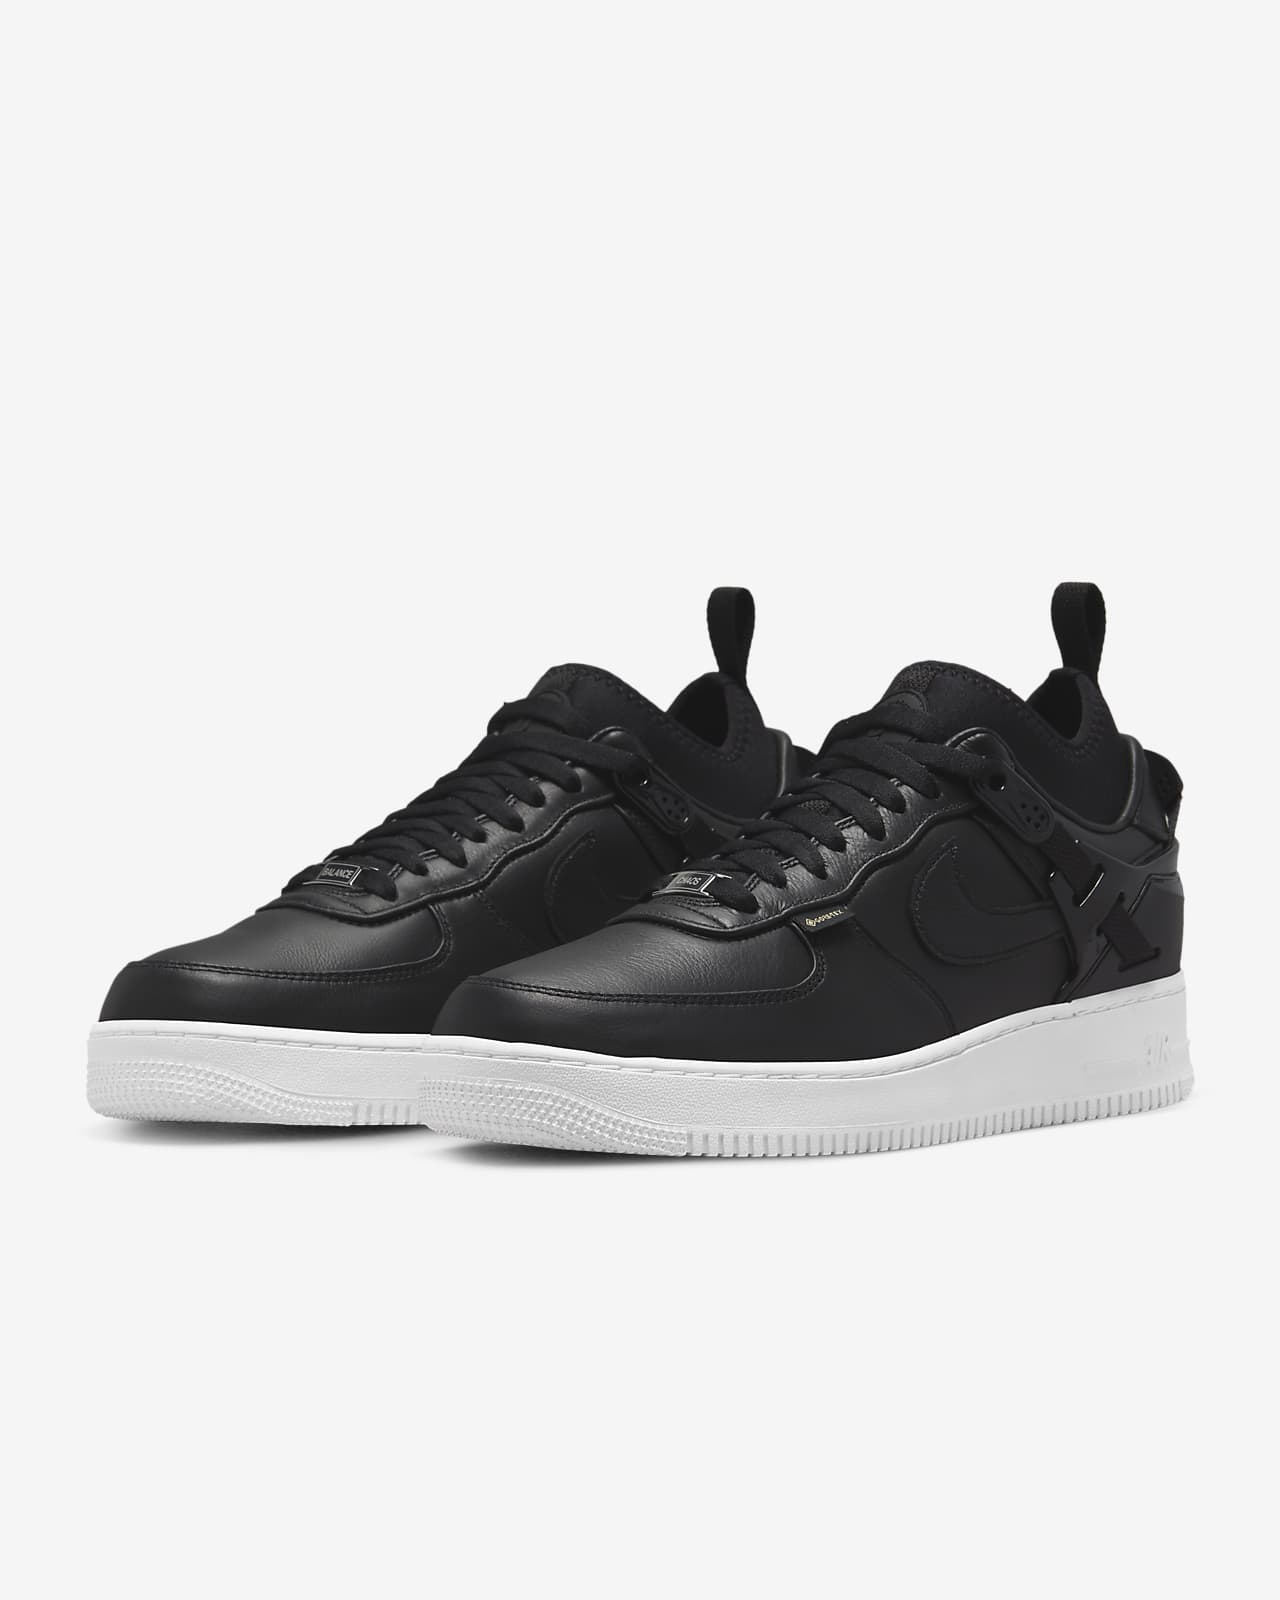 Nike x UNDERCOVER Air Force 1 Low GORE-TEX UK9